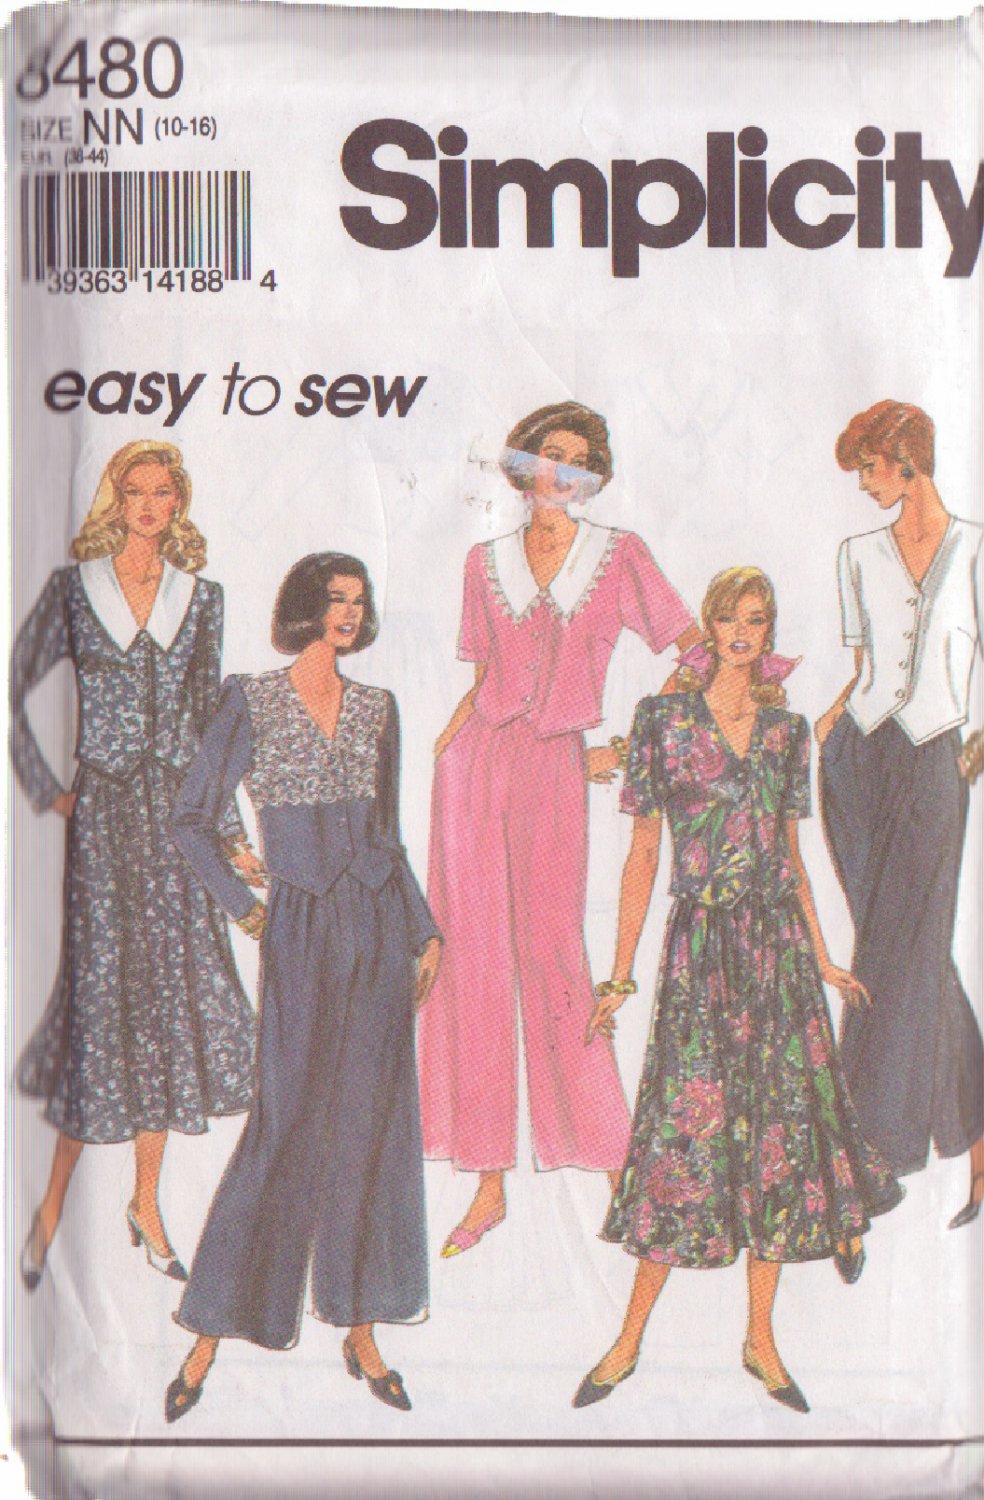 SIMPLICITY PATTERN 8480 SZ 10-16 MISSES PULL-ON PANTS, SKIRT,TOP 2 ...